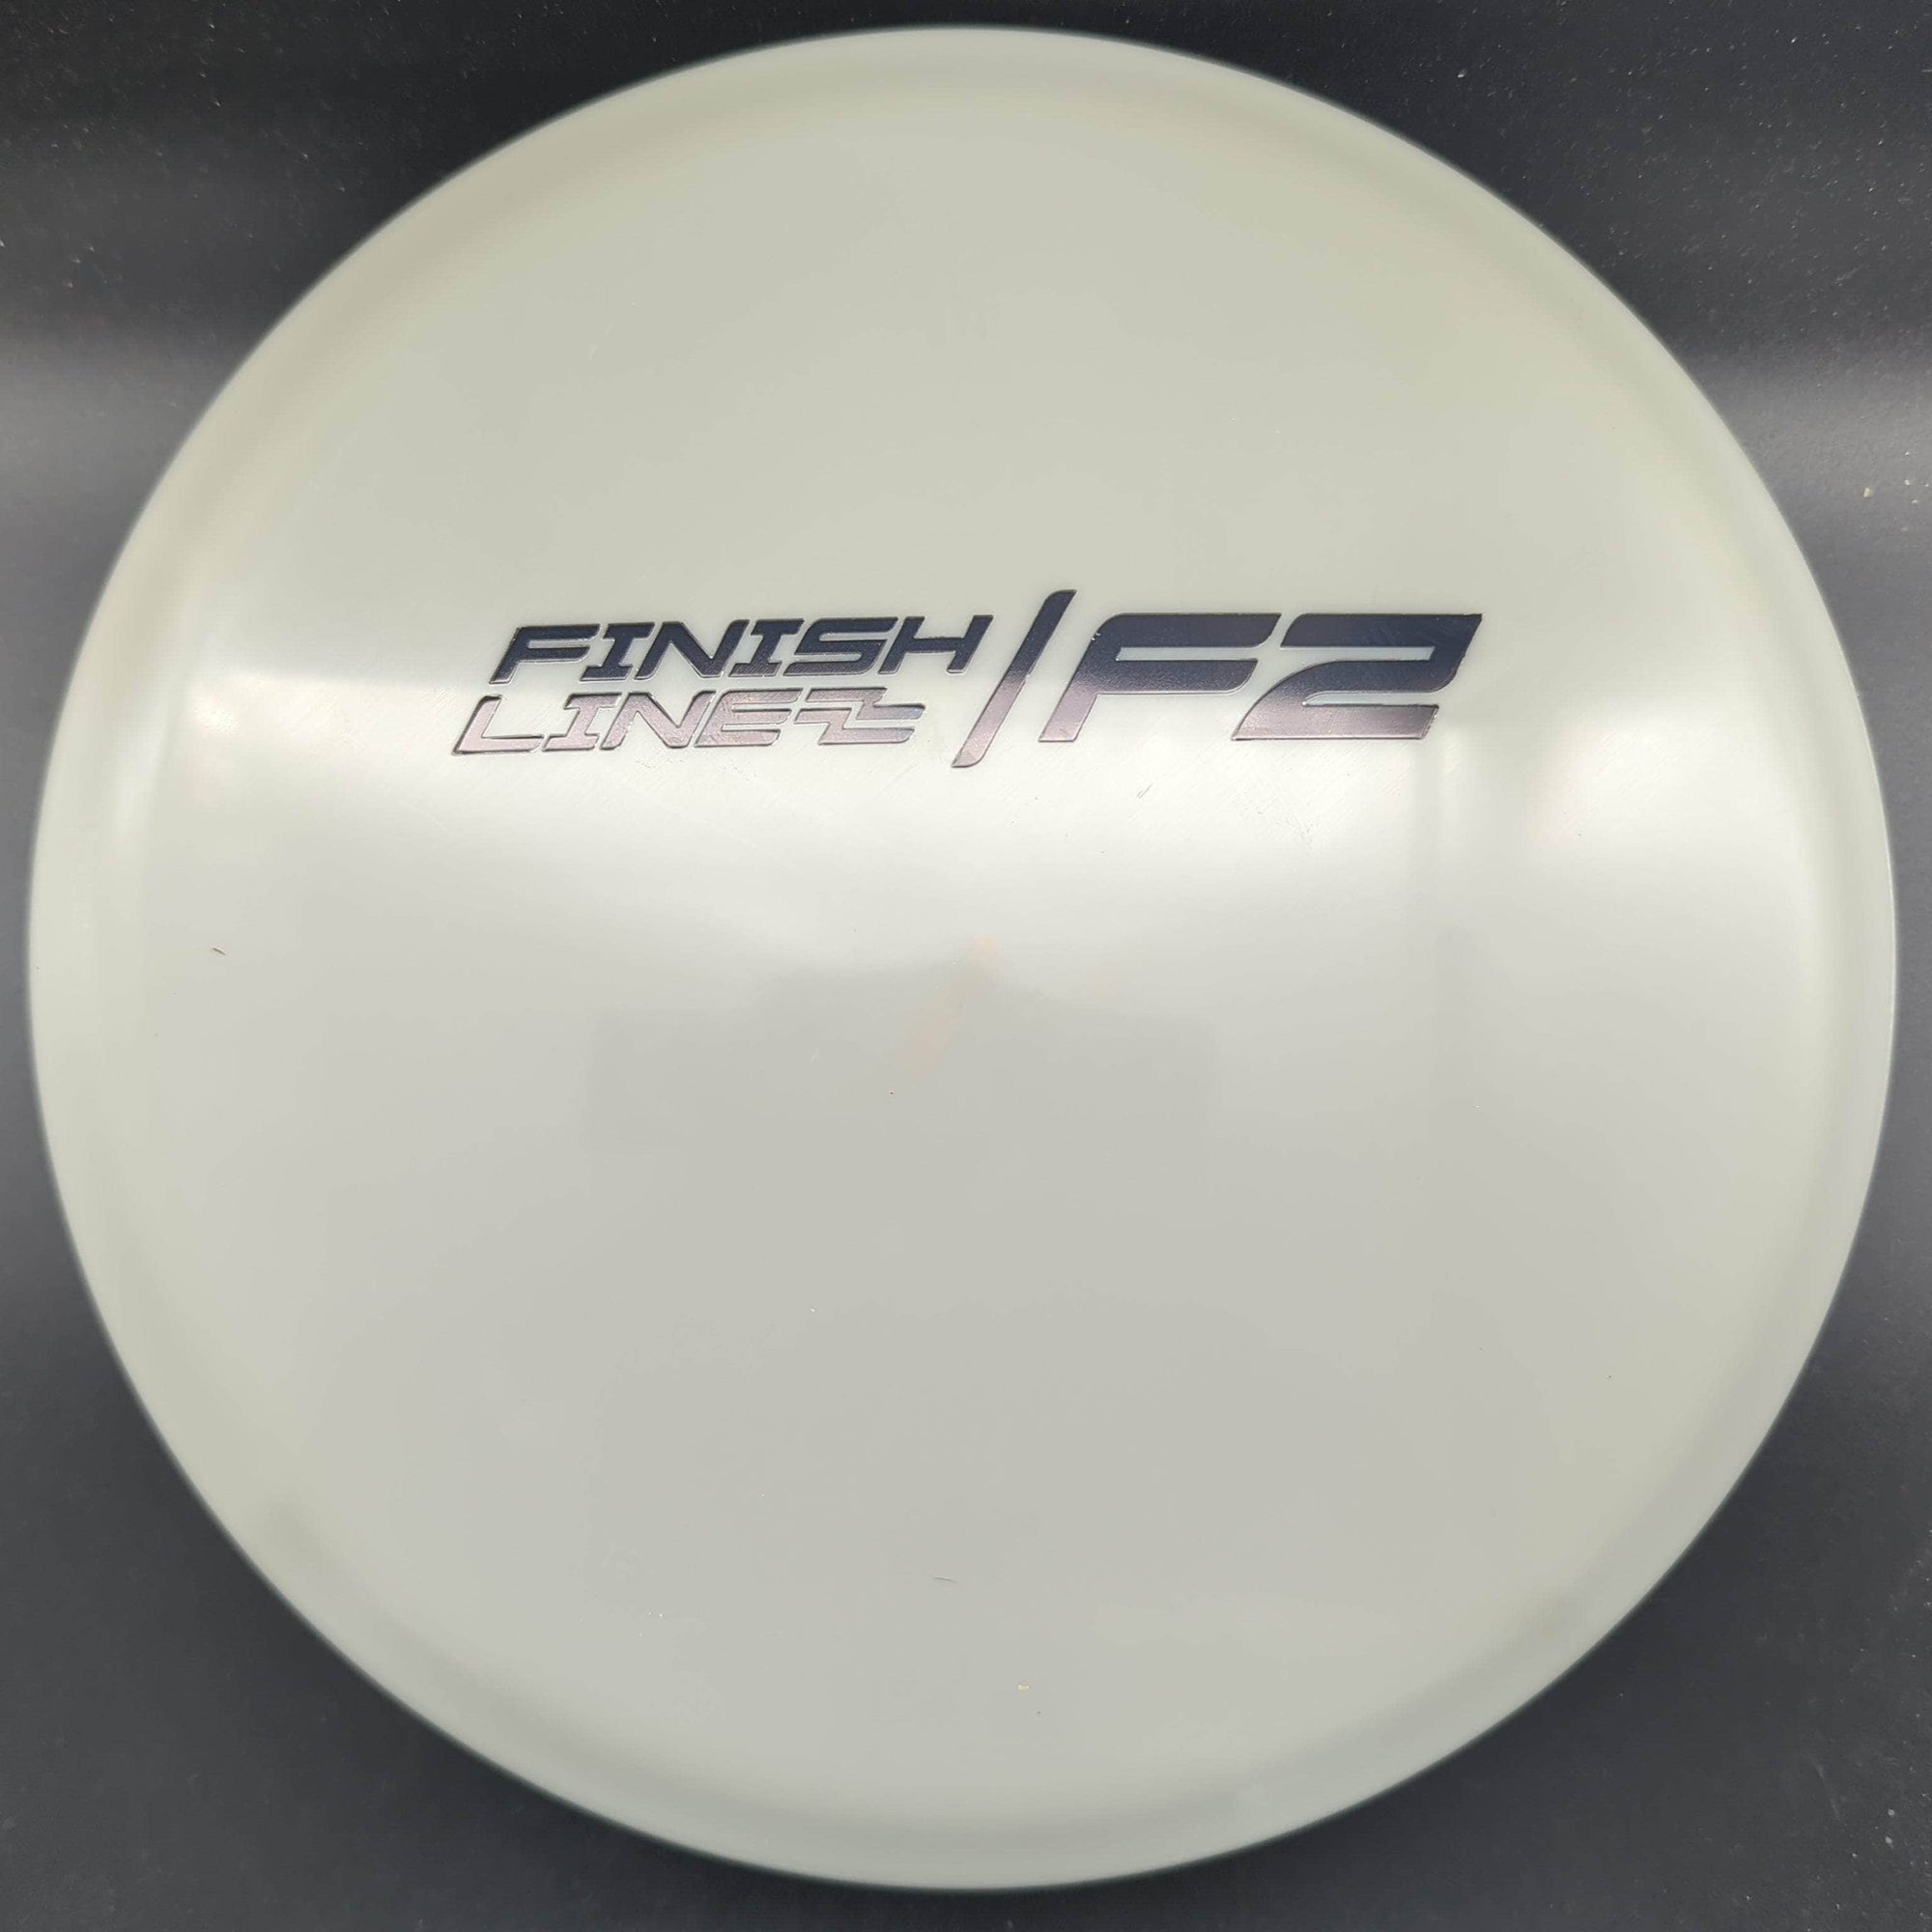 Finish Line Distance Driver Grey Black Stamp 179g Supra, Forged Plastic, Factory Second